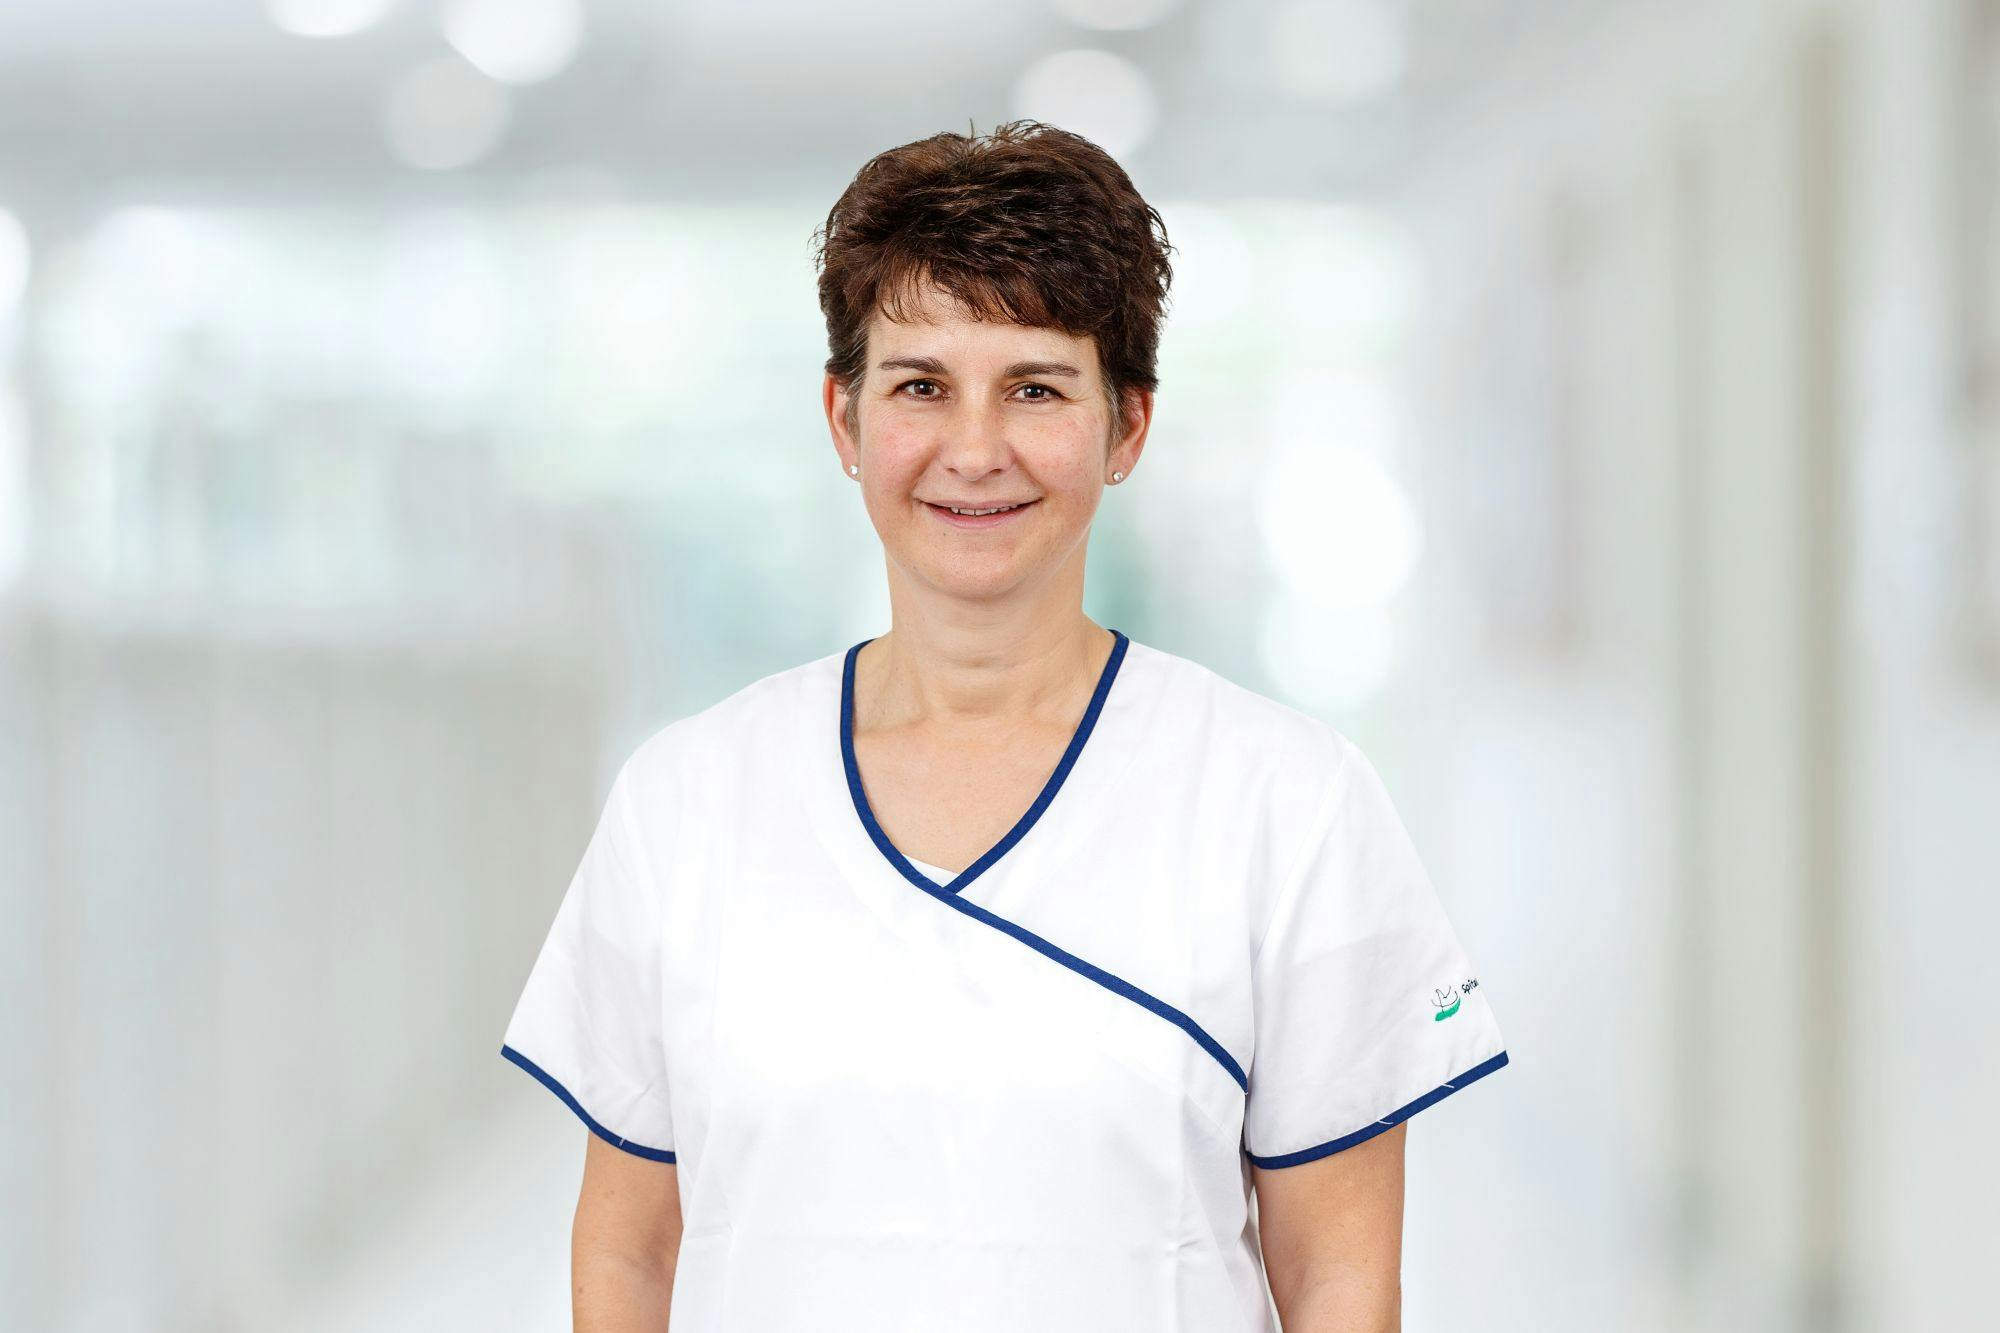 Smiling medical professional in white professional clothing with blue accents against a blurred background.